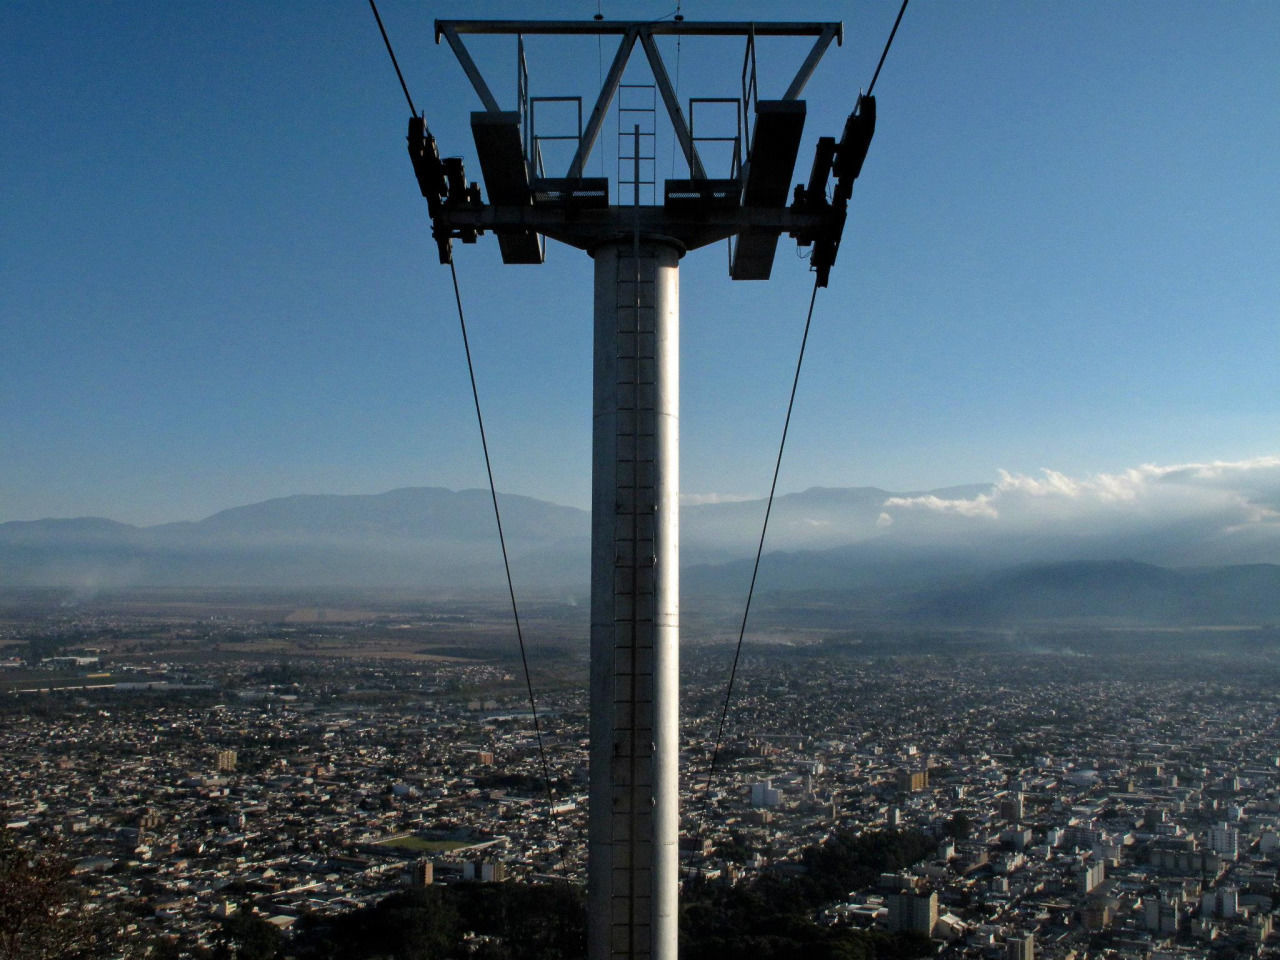 Overhead cable car tower in city against sky